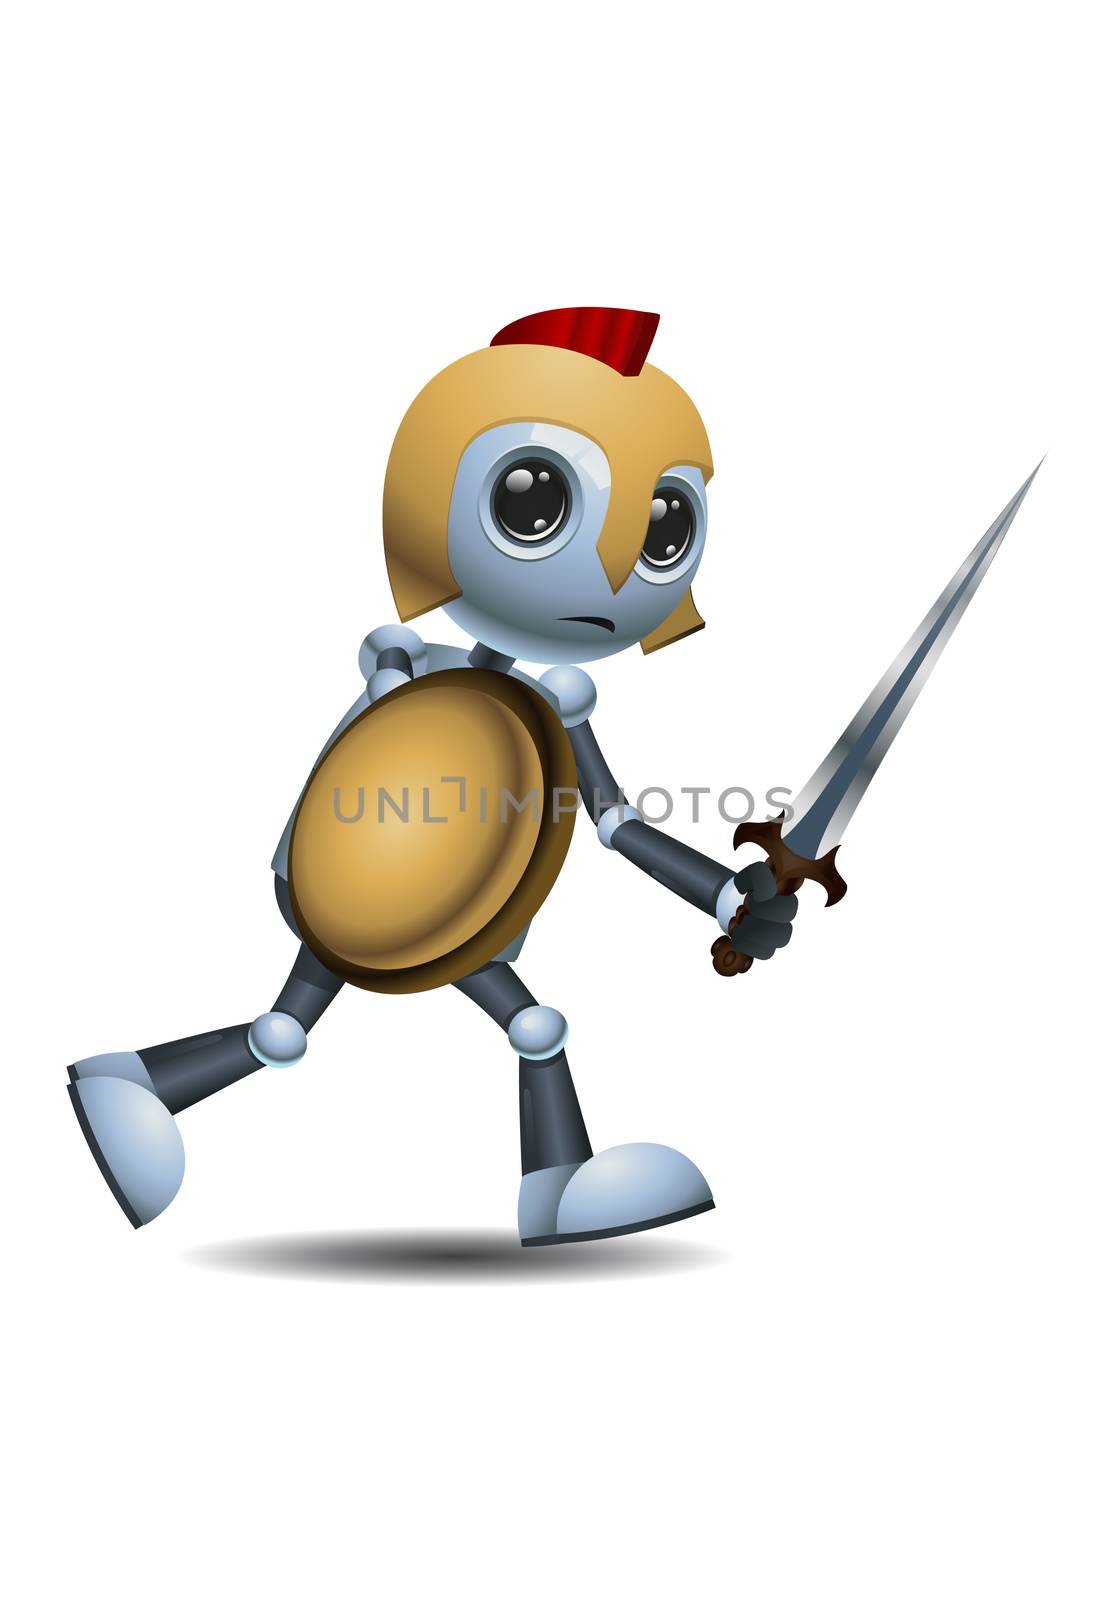 illustration of a happy droid little robot warrior going to war on isolated white background